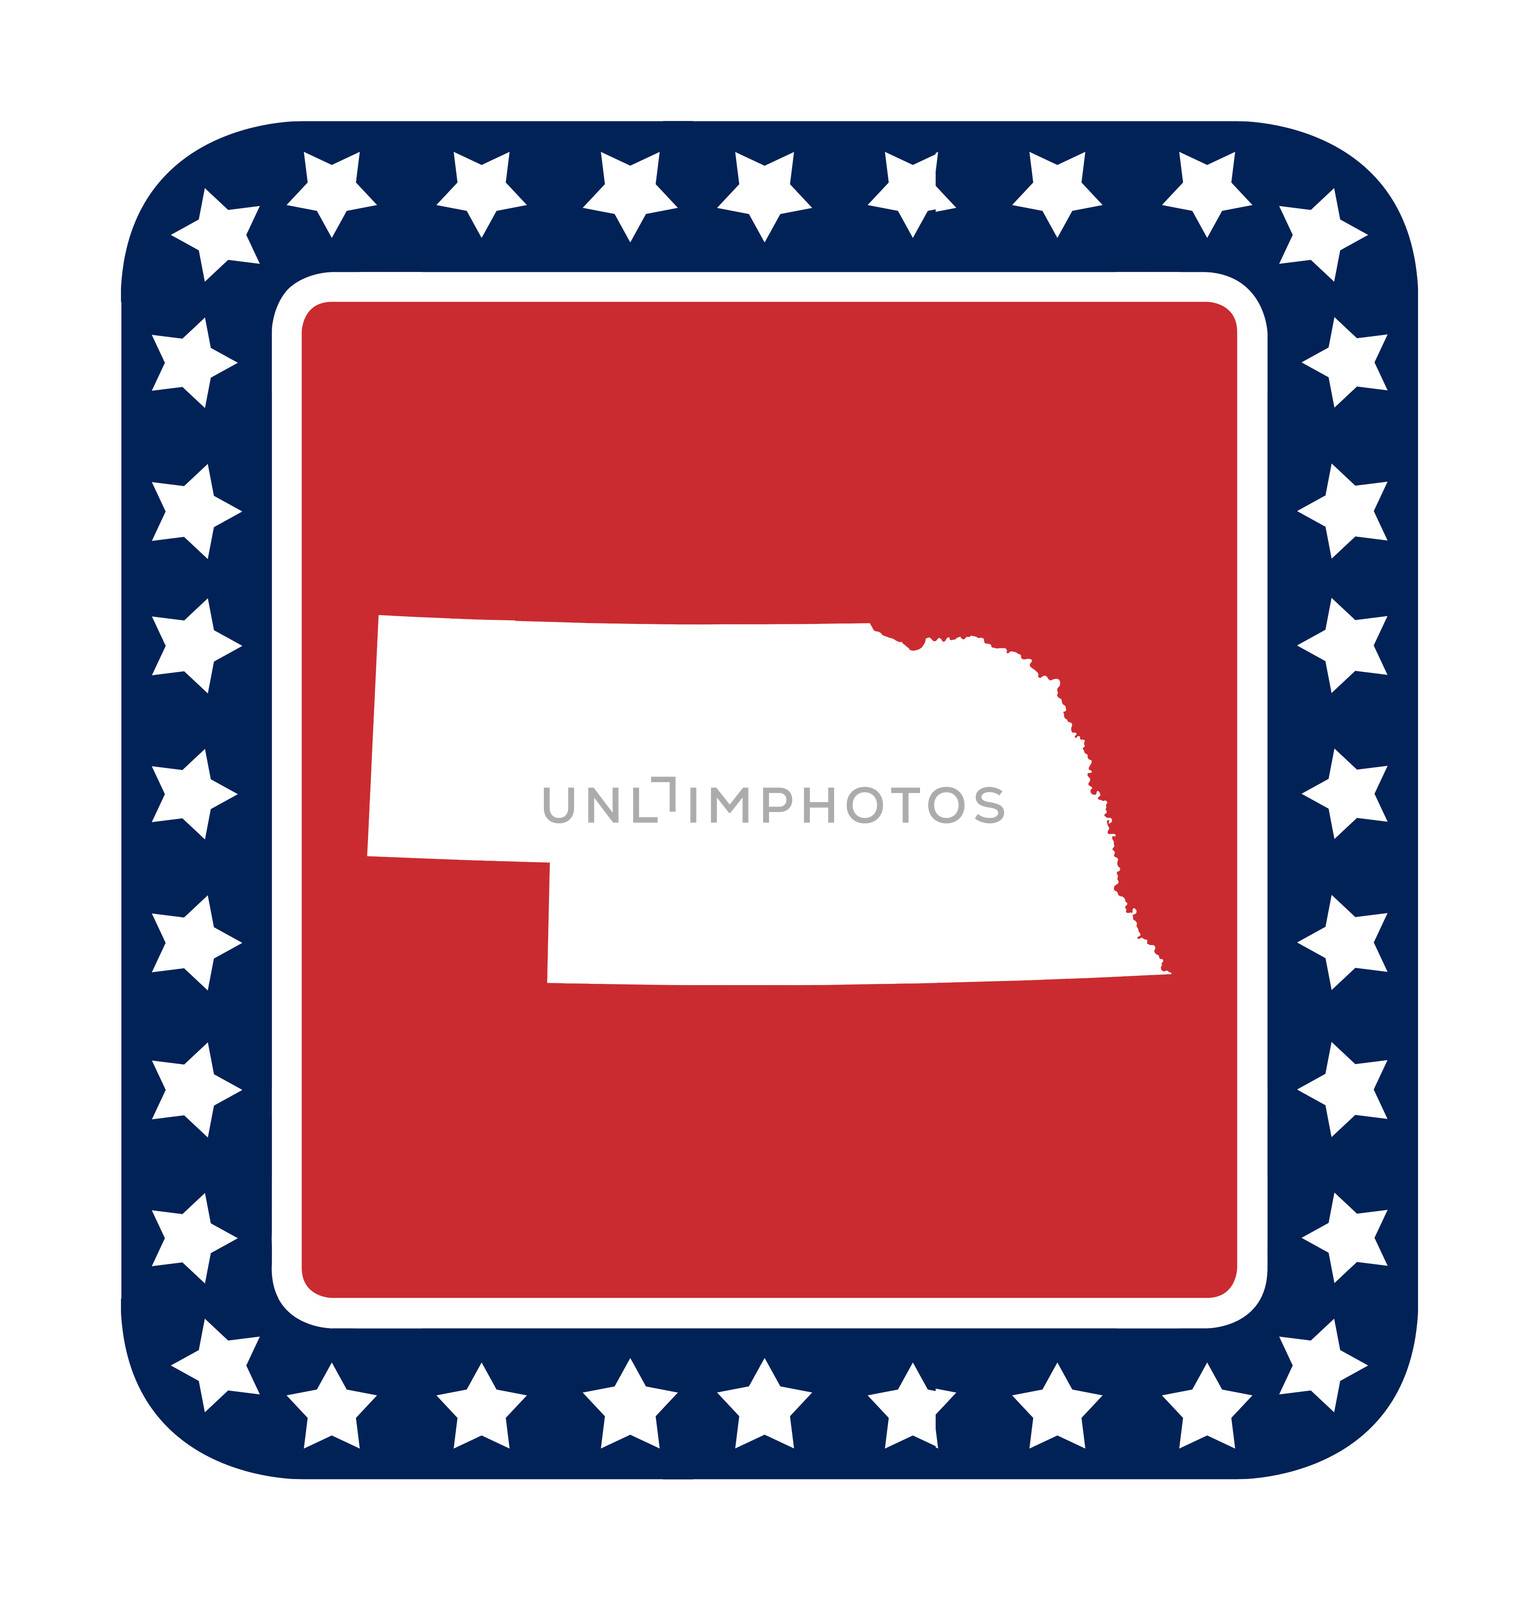 Nebraska state button on American flag in flat web design style, isolated on white background.